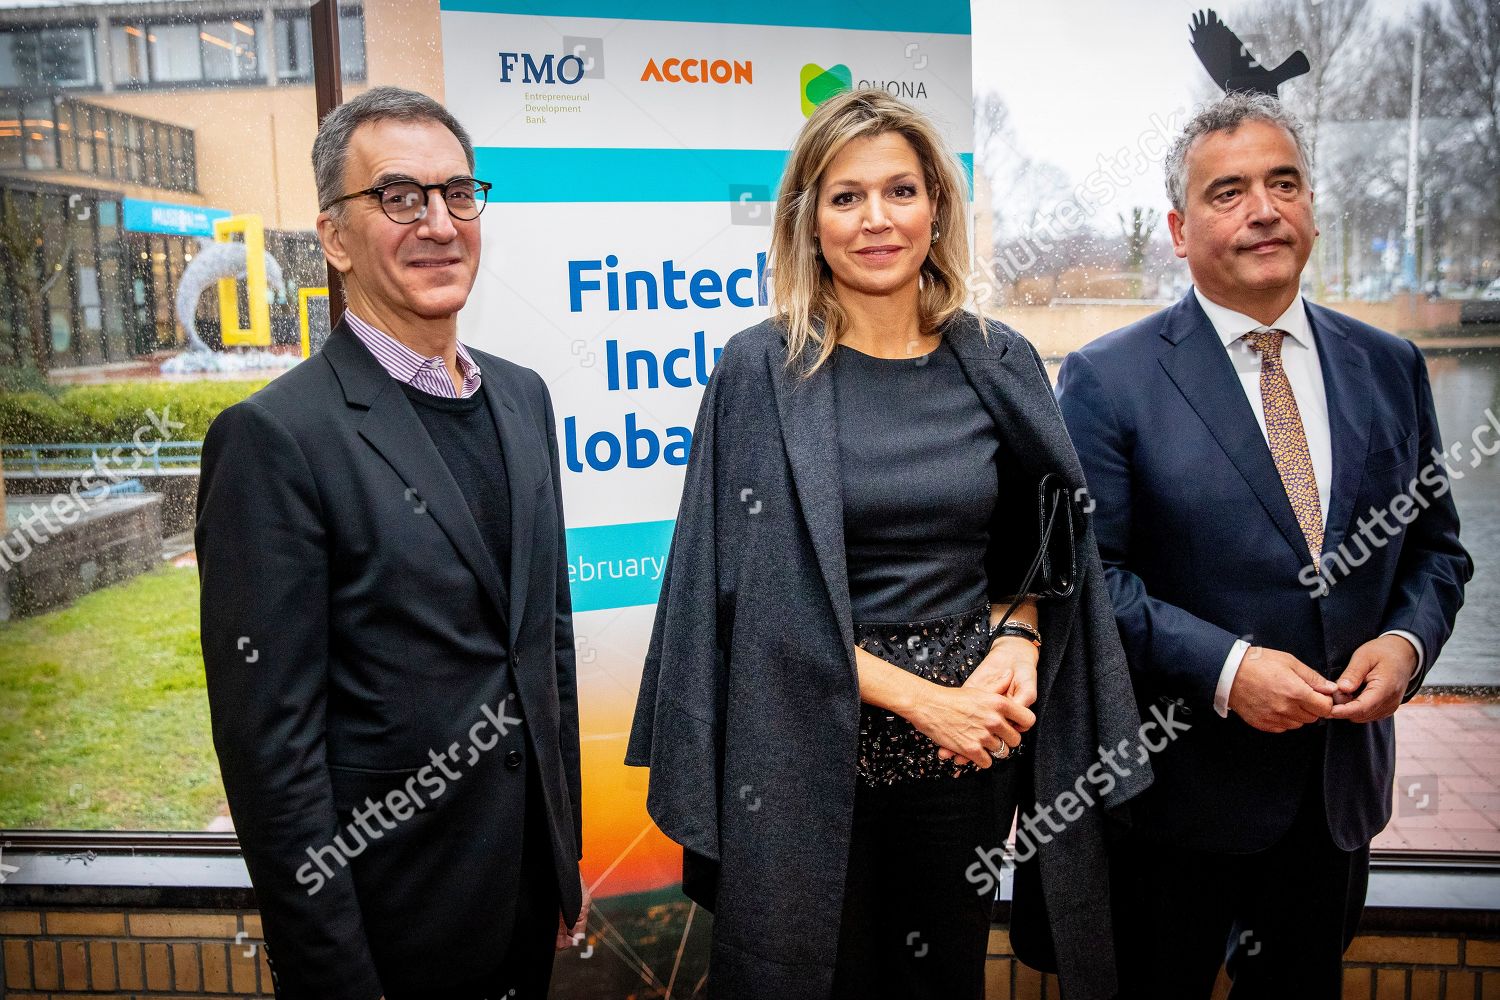 fintech-for-inclusion-conference-the-hague-netherlands-shutterstock-editorial-10098443o.jpg